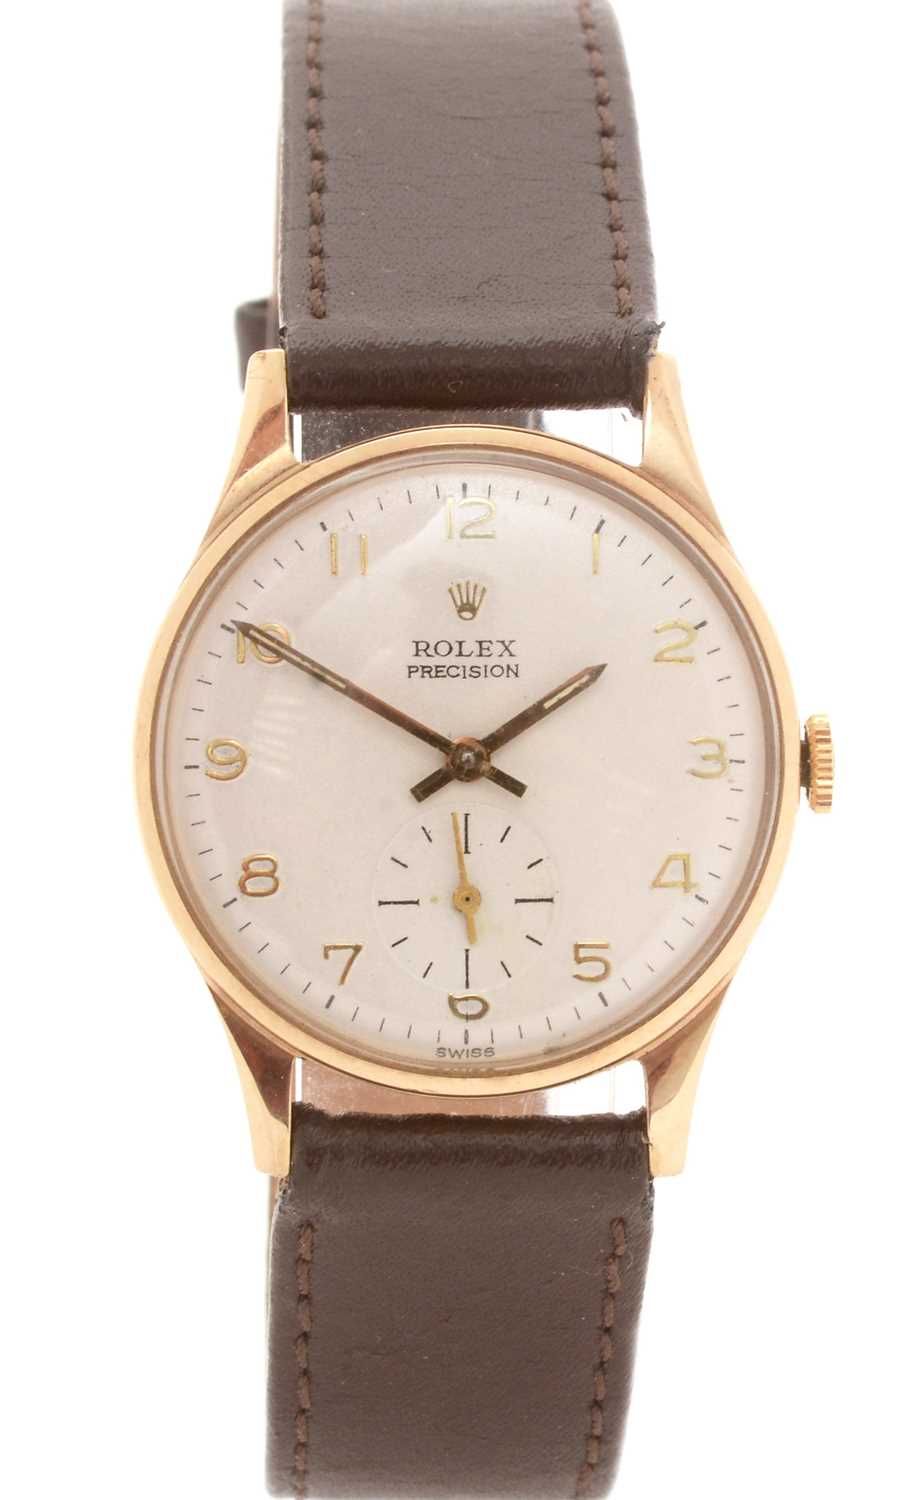 Lot 10 - Rolex Precision: a 9ct yellow gold cased wristwatch